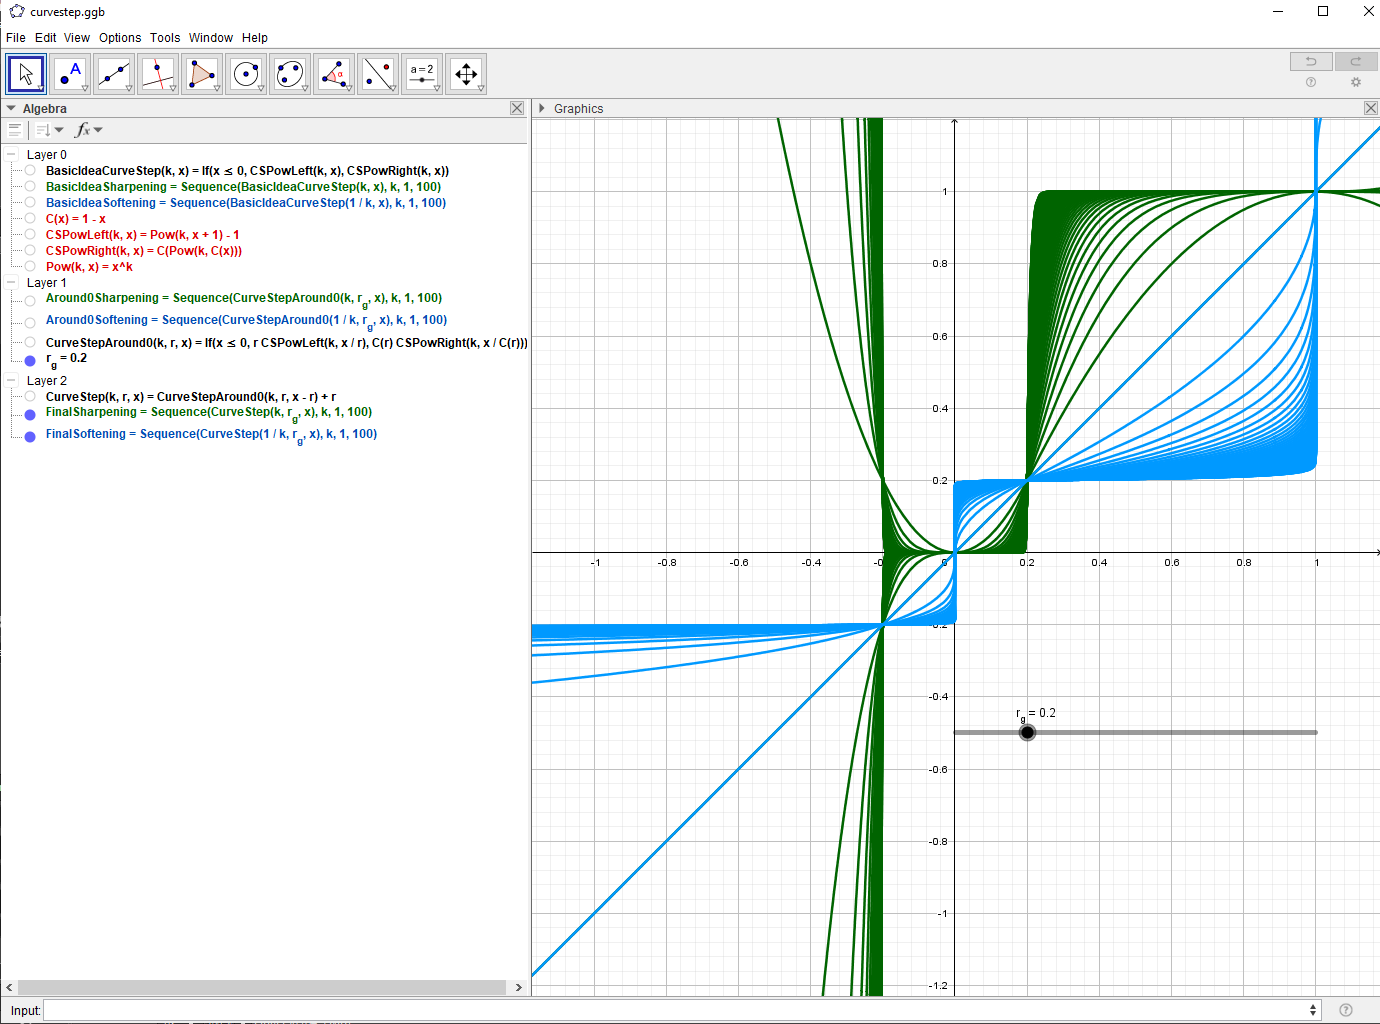 Visualization with Geogebra of a family of curves generated with the function CurveStep, r = 0.2